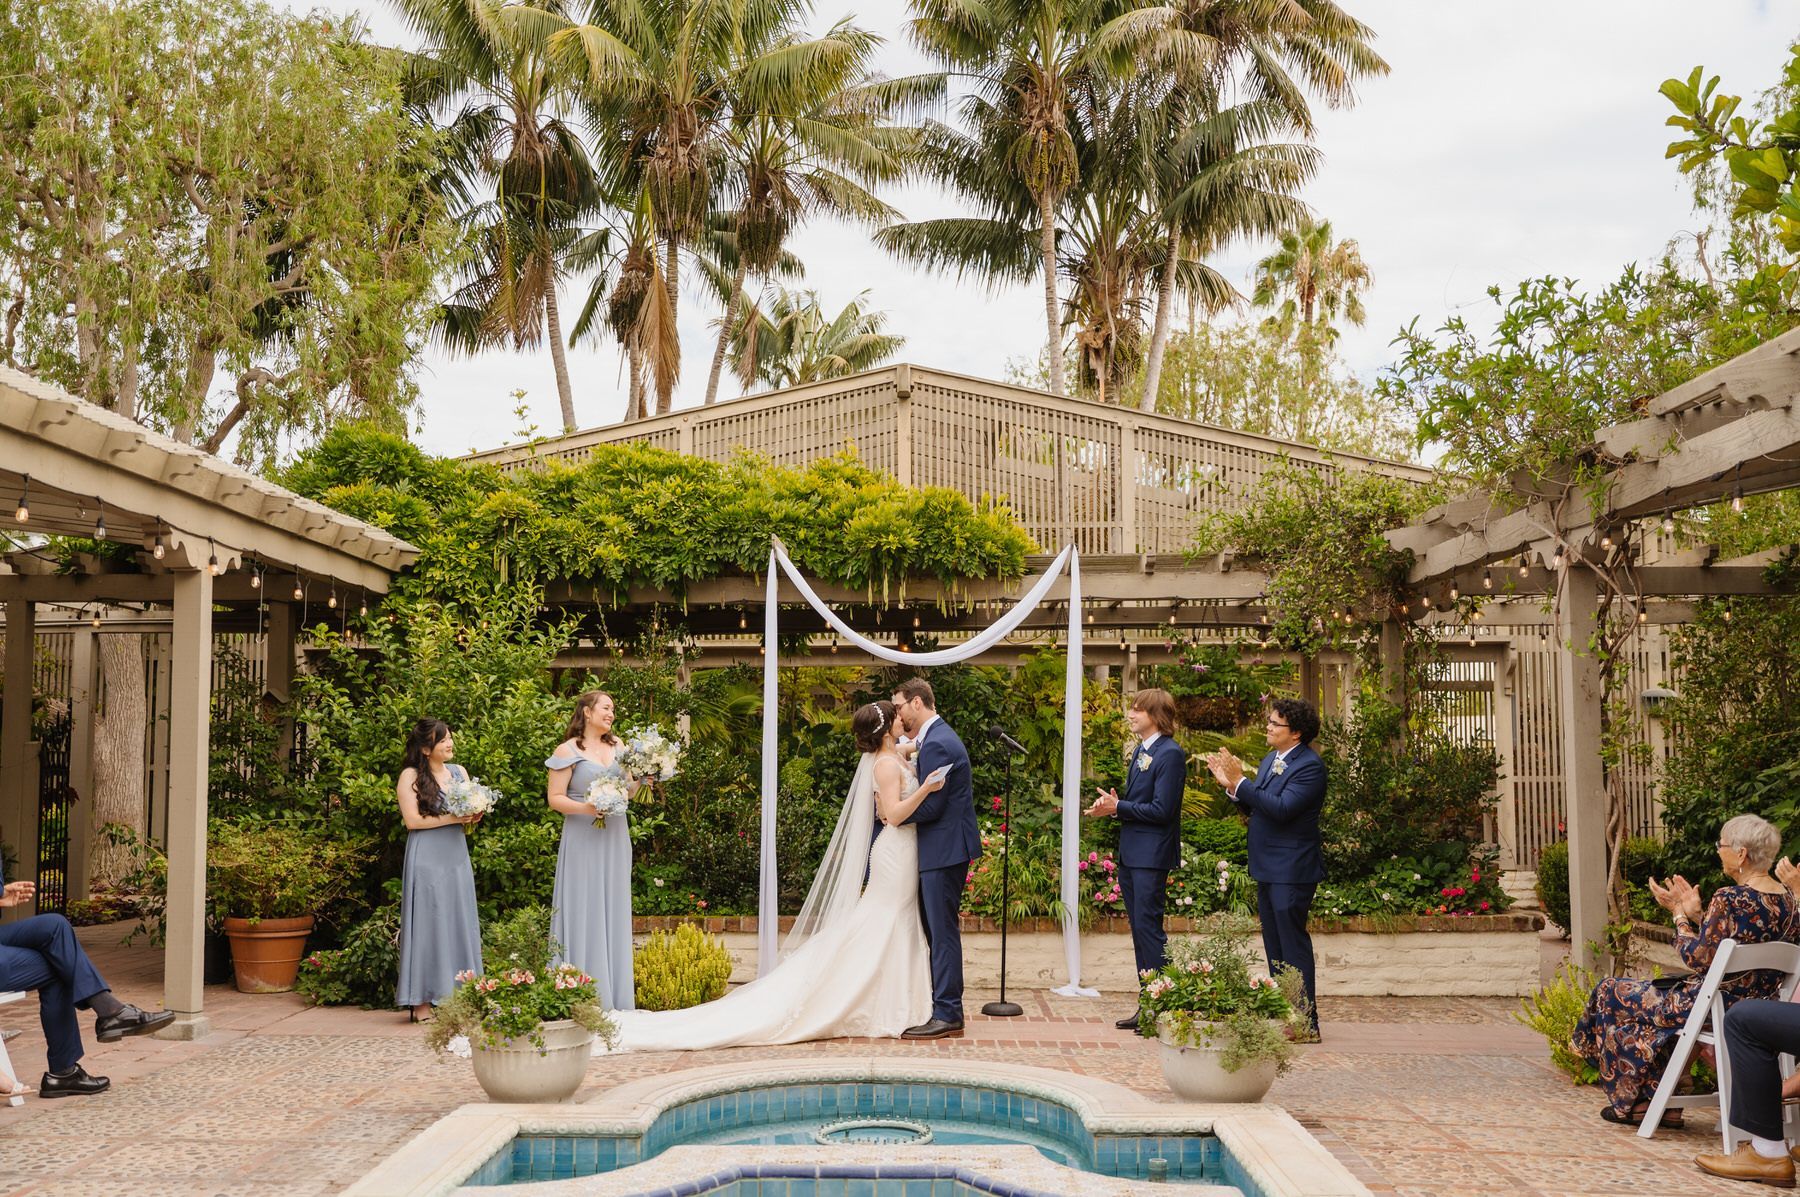 A bride and groom are kissing during their wedding ceremony in front of a pool.